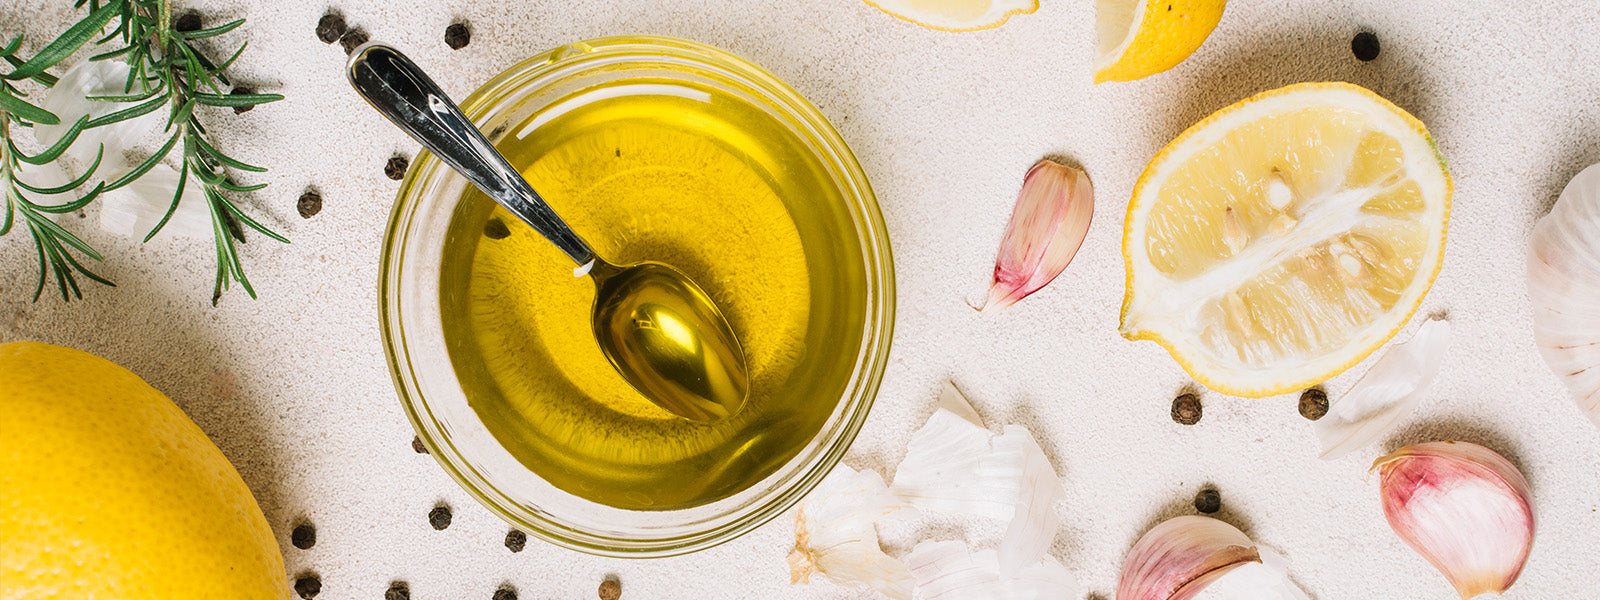 What are the health benefits of olive oil?